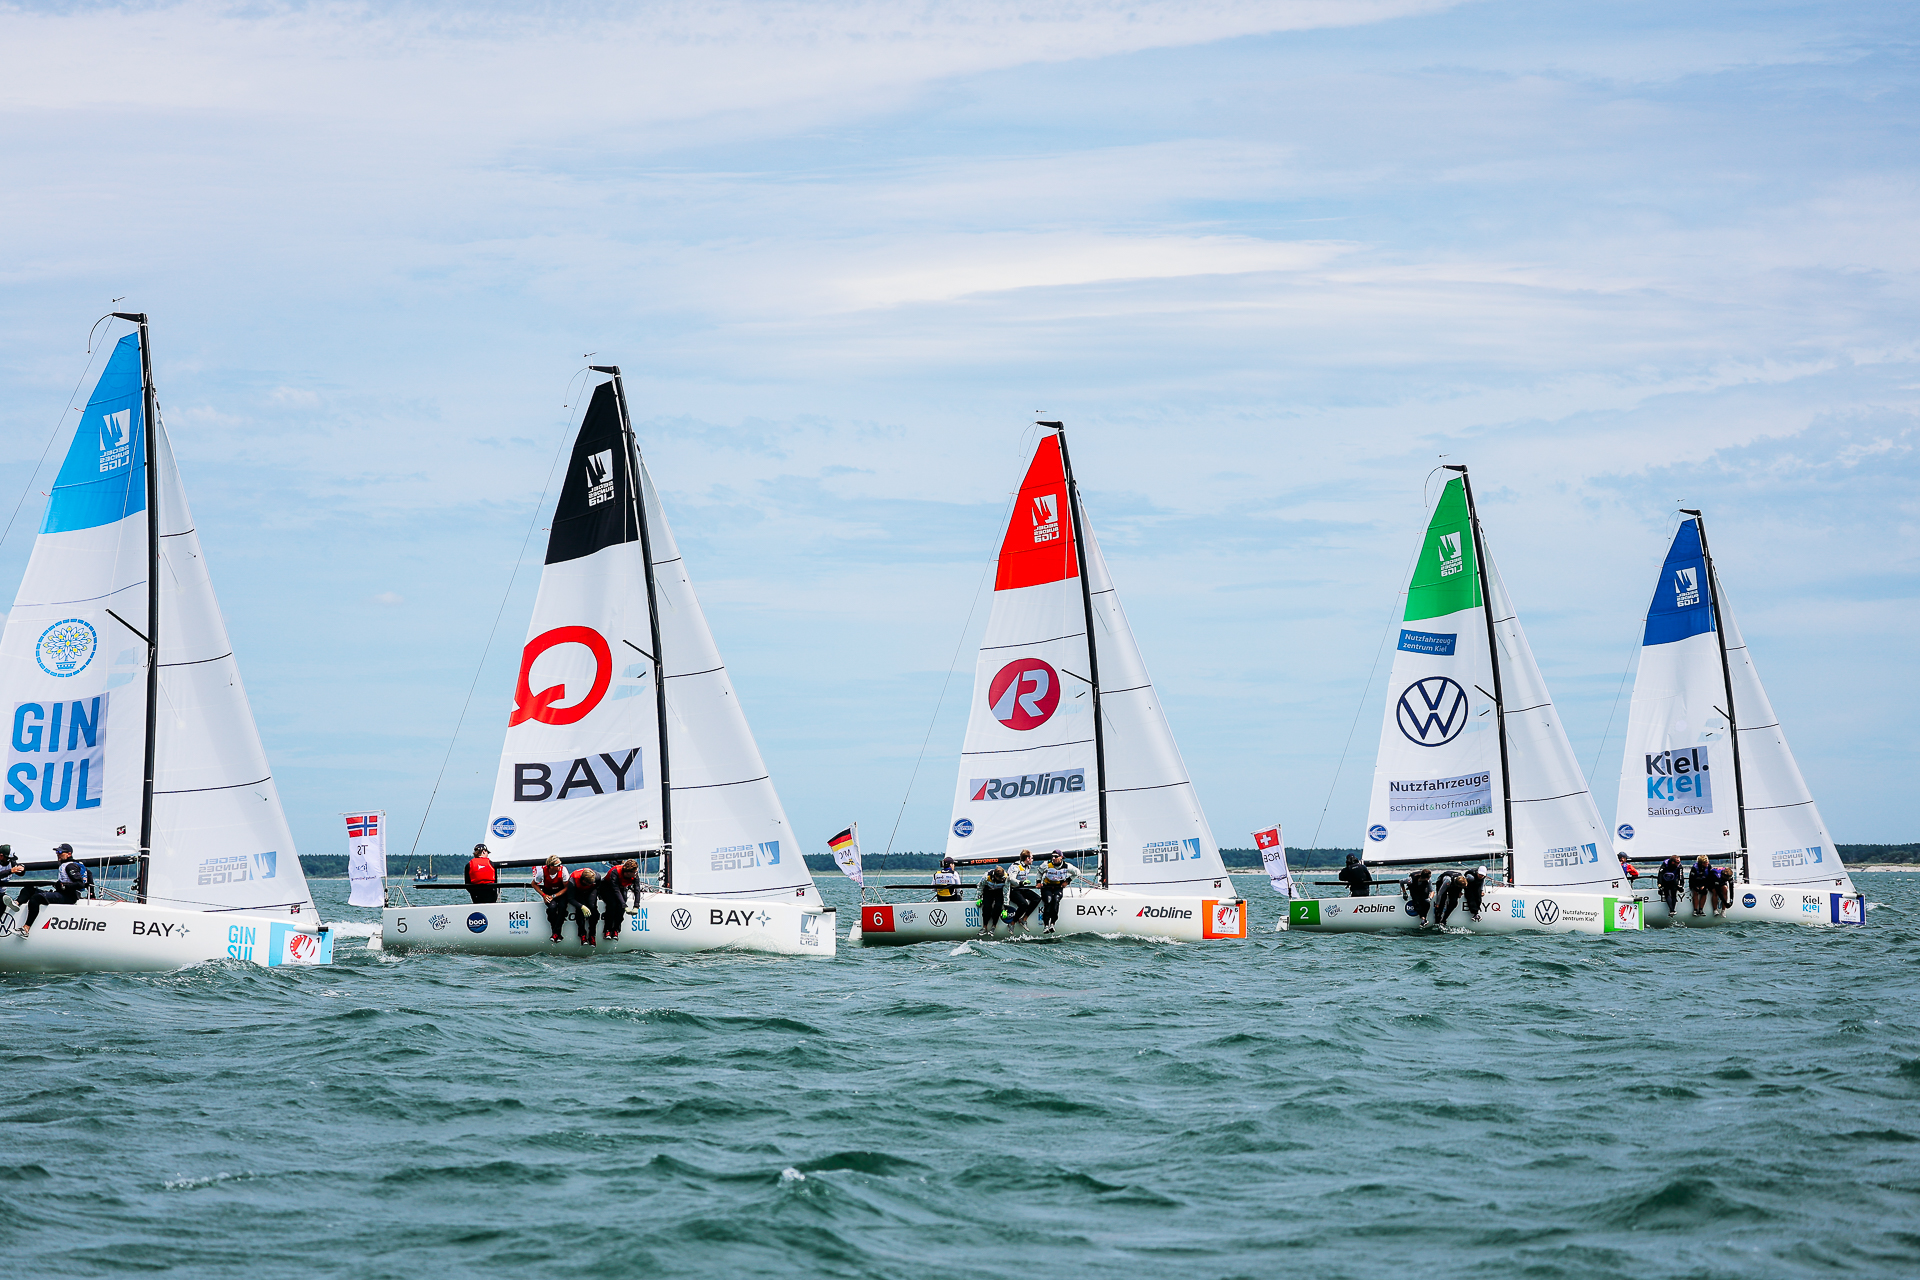  J/70  Sailing Champions League  Qualifier 3  Warnemuende GER  Final results